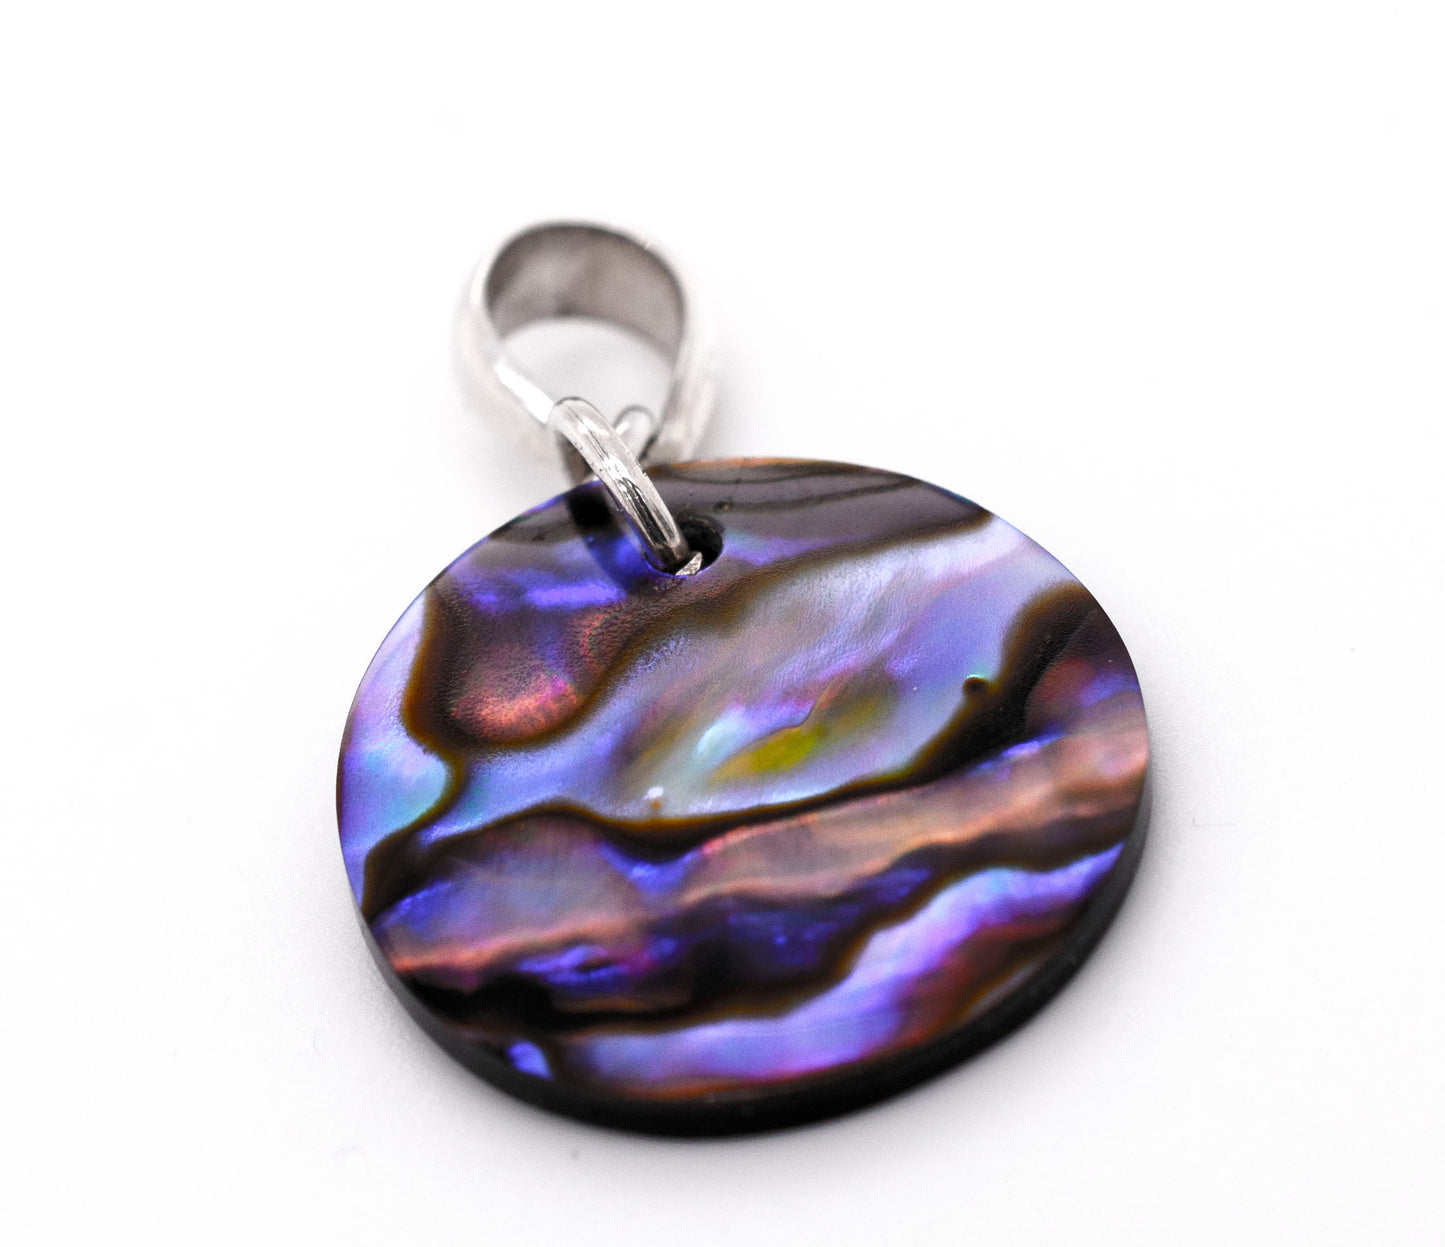 A handmade Super Silver Charming Abalone Pendant showcasing its healing properties, placed delicately on a pristine white surface.